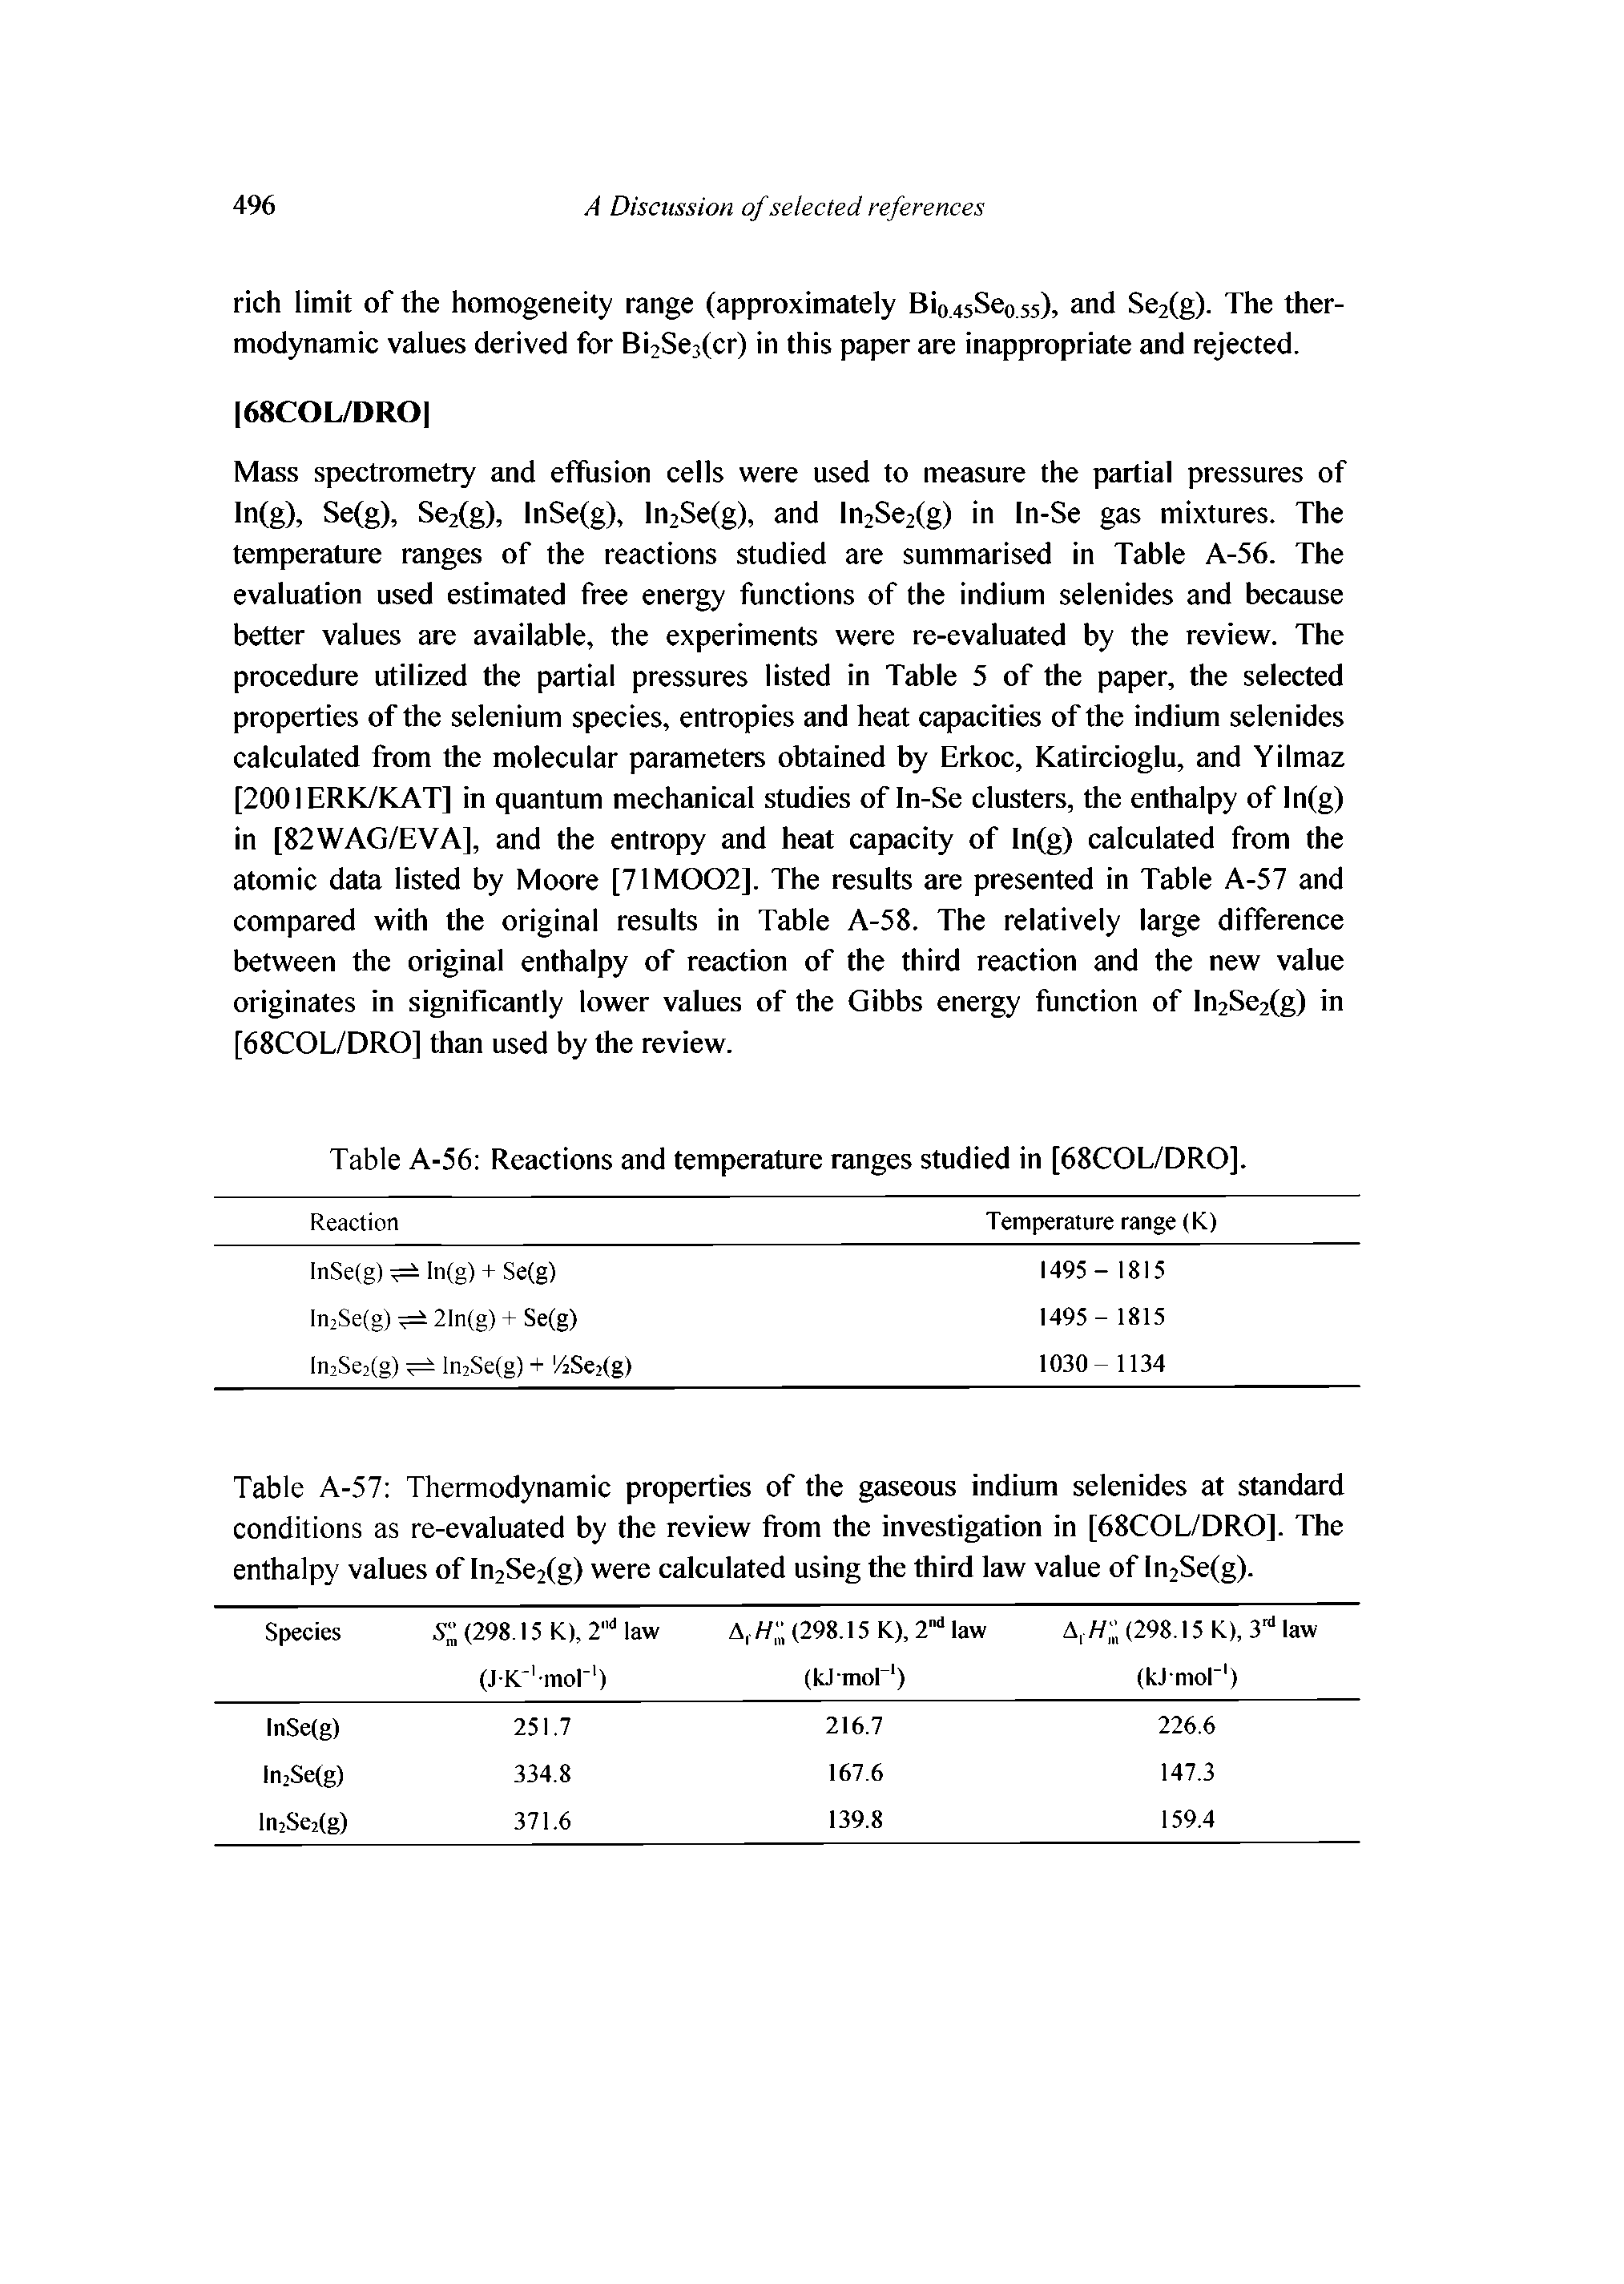 Table A-57 Thermodynamic properties of the gaseous indium selenides at standard conditions as re-evaluated by the review from the investigation in [68COL/DRO]. The enthalpy values of In2Se2(g) were calculated using the third law value of ln2Se(g).